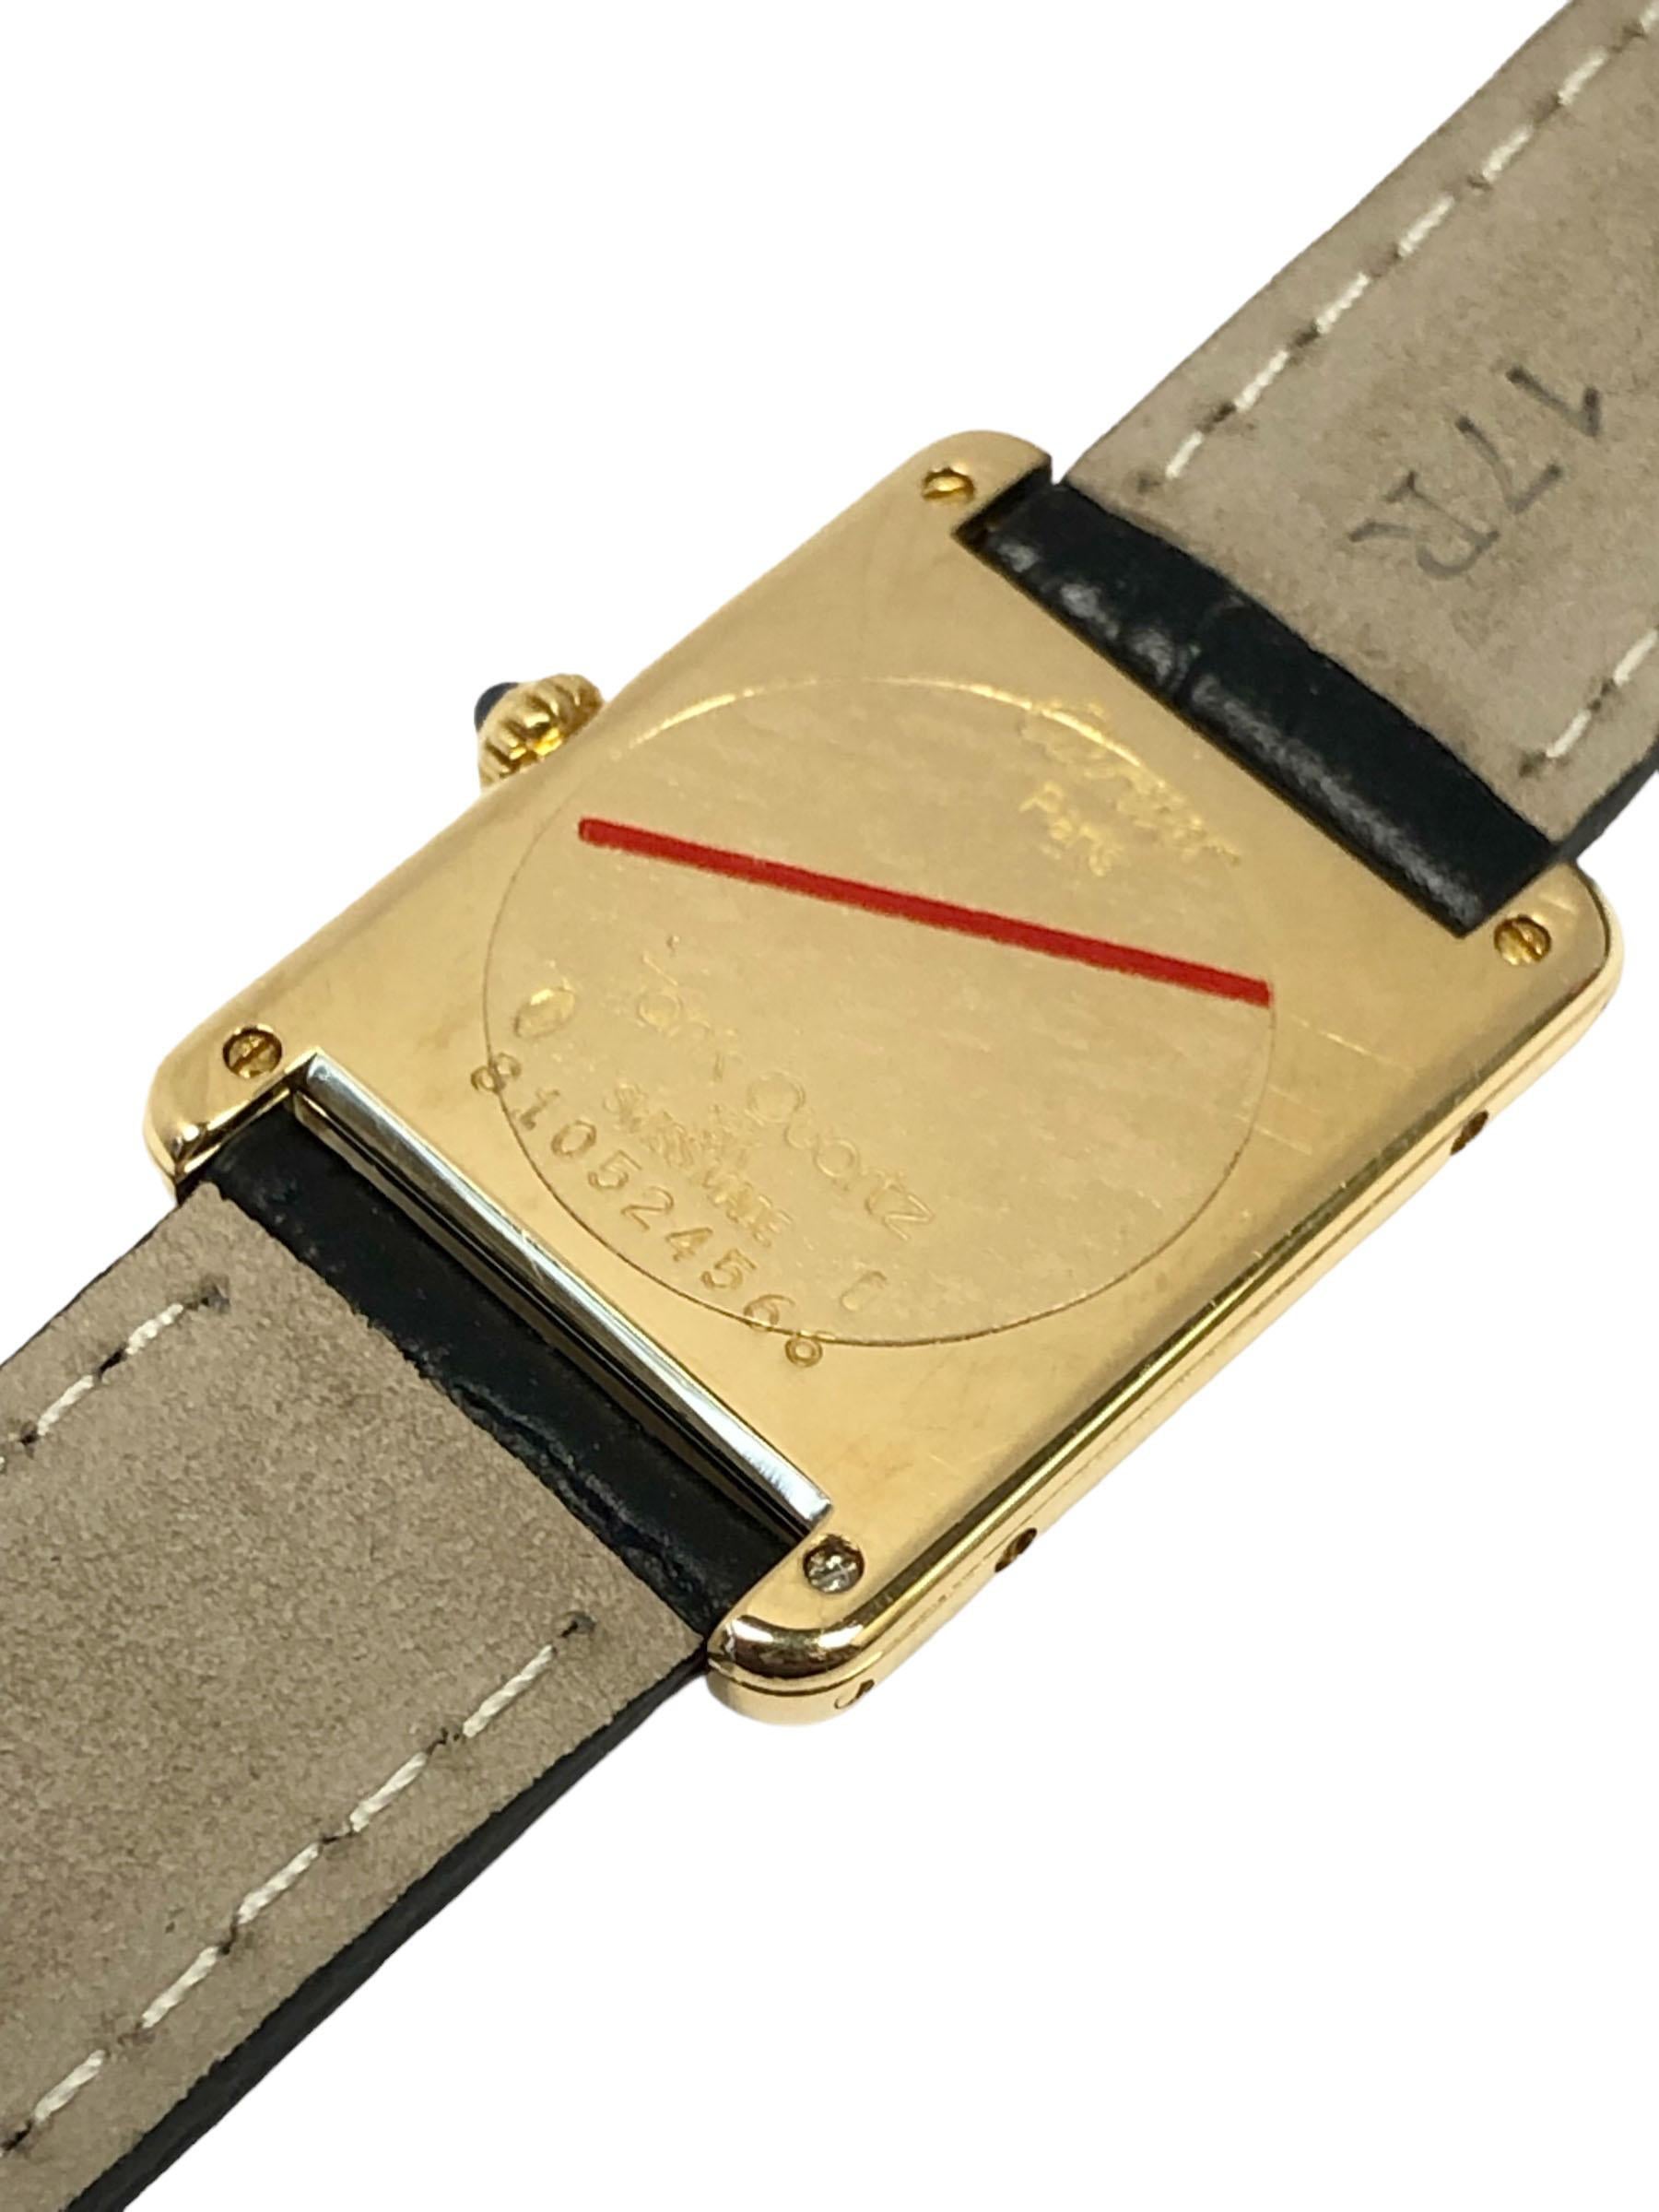 Circa 2000 Cartier Louis Cartier mid size Tank Wrist Watch, 30 X 23 M.M. 2 Piece 18K yellow Gold case, Quartz movement, Sapphire Crown, White Dial with Black Roman numerals. New Hadly Roma  Black Croco grain strap with a Cartier Gold Plate Tang